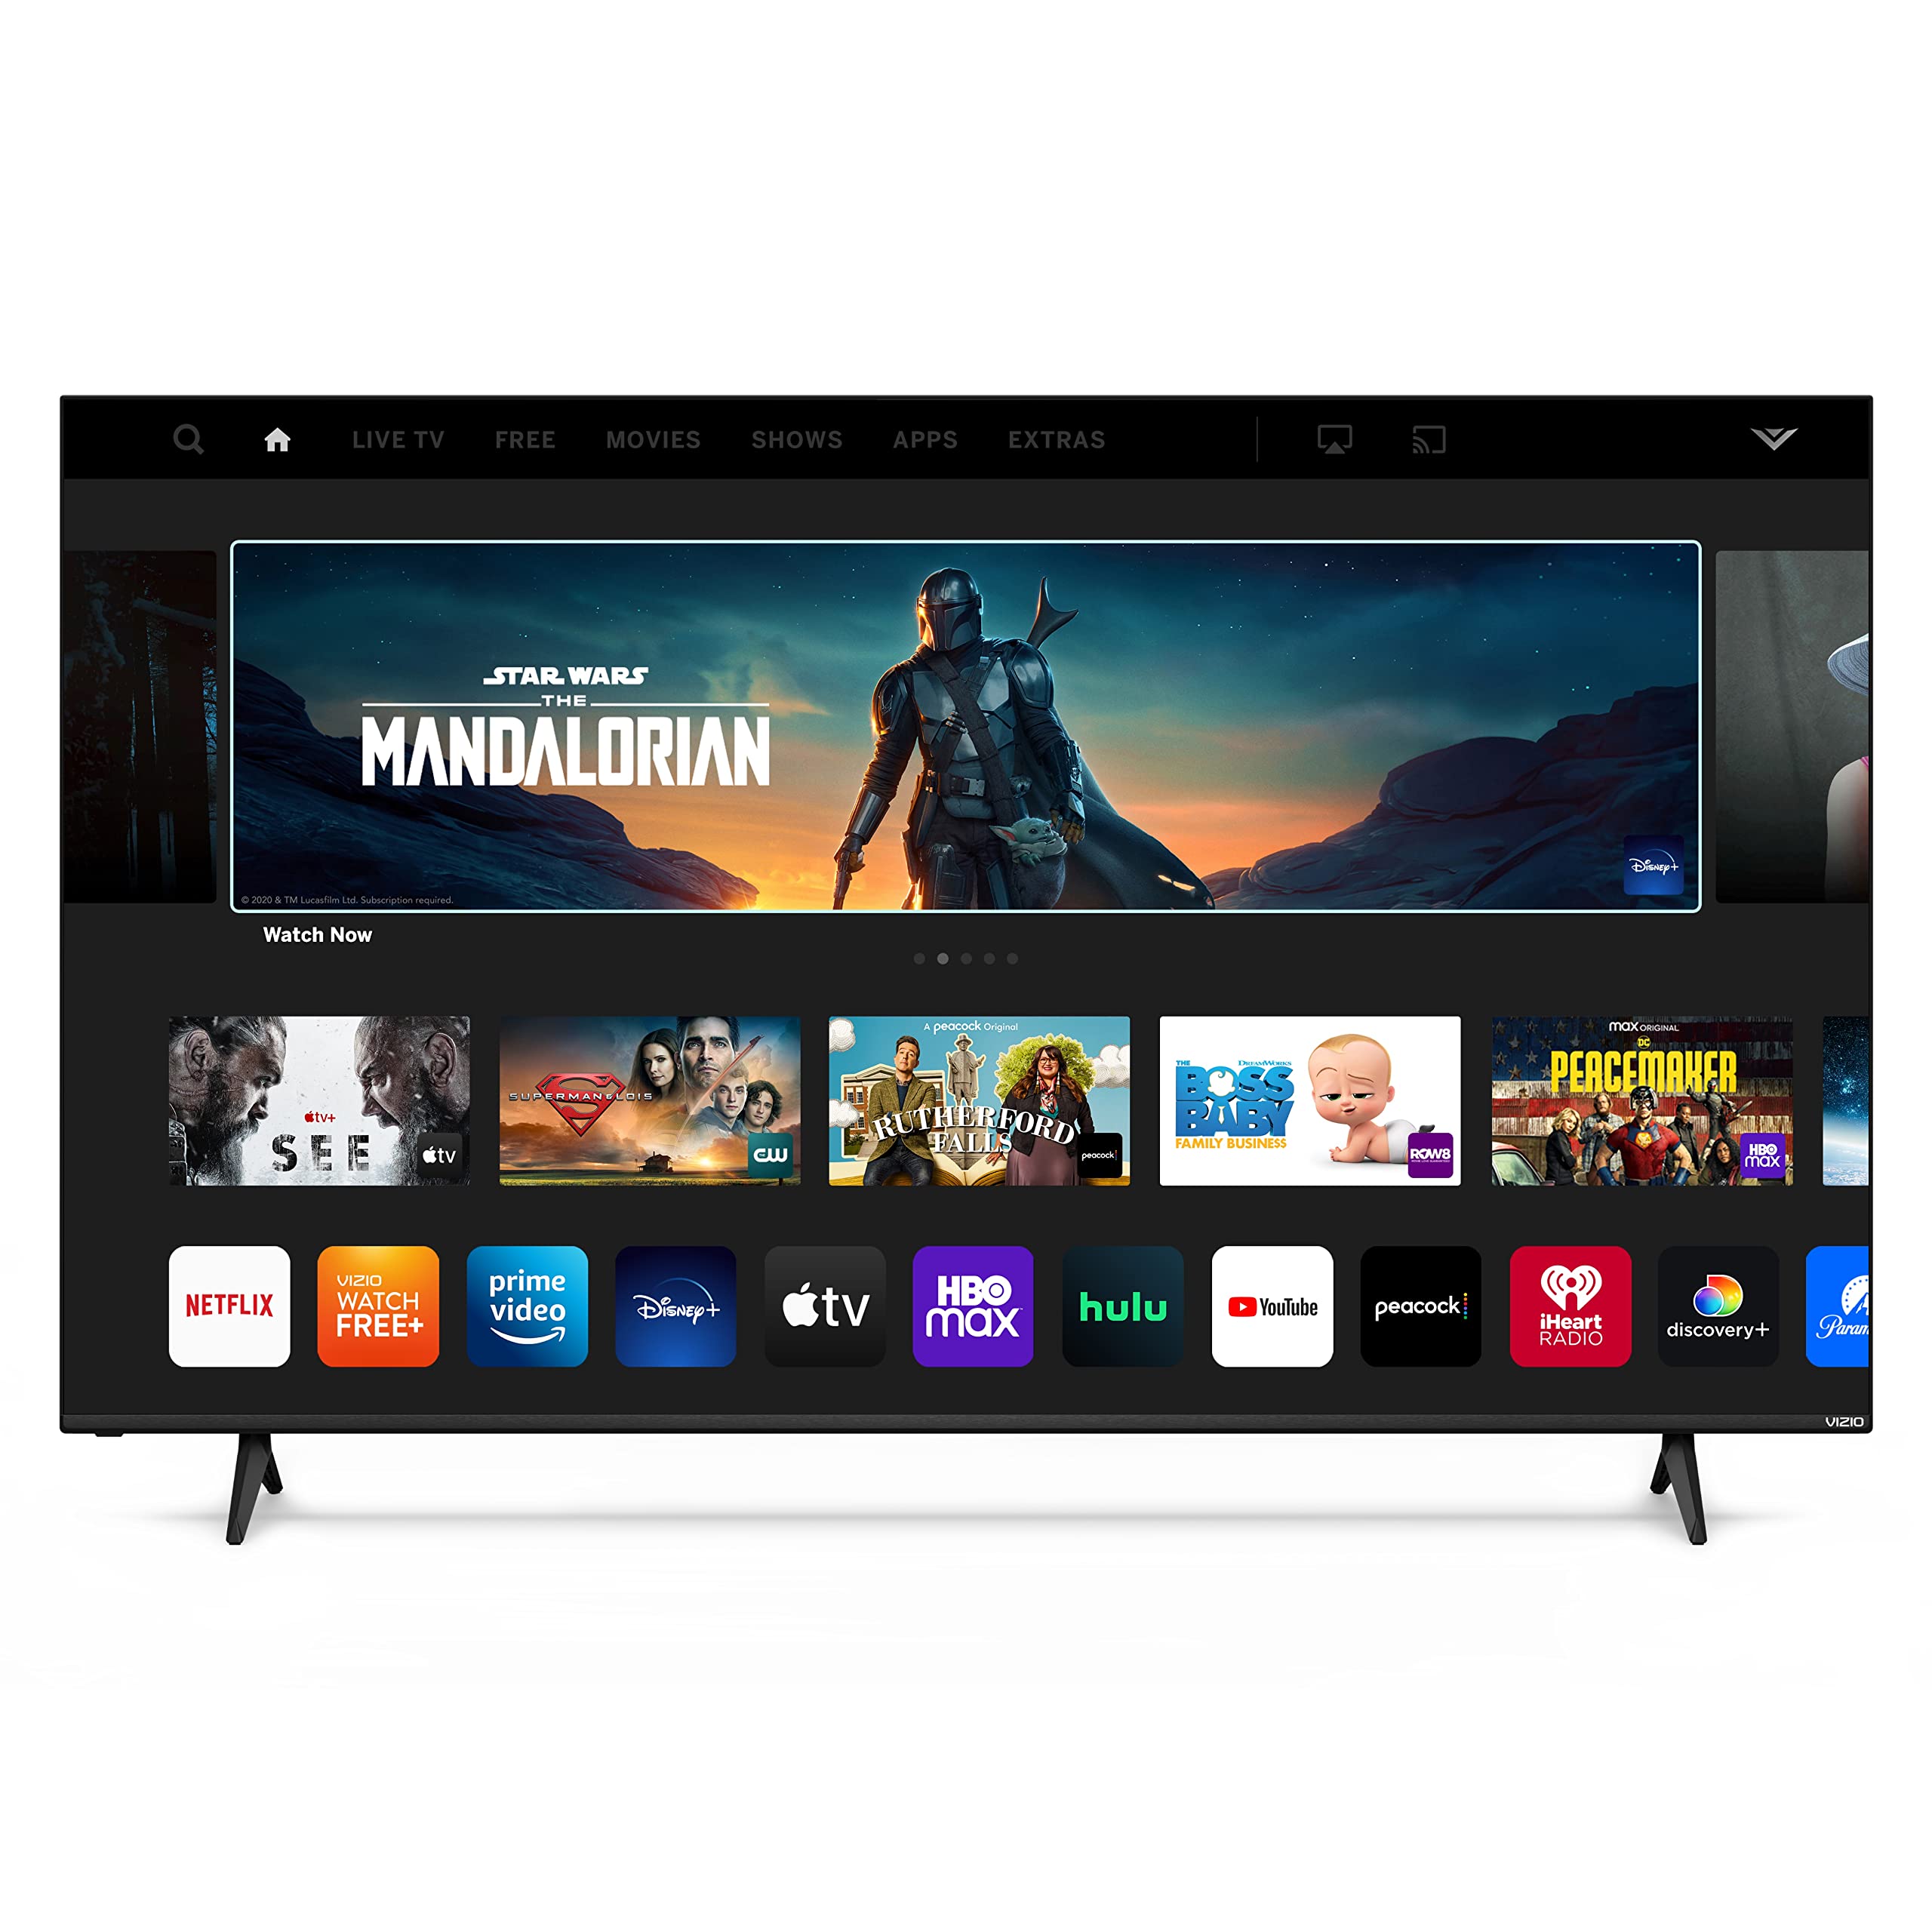 VIZIO 65-Inch M-Series 4K QLED HDR Smart TV with Voice Remote, Dolby Vision, HDR10+, Alexa Compatibility, VRR with AMD FreeSync, M65Q6-J09, 2022 Model